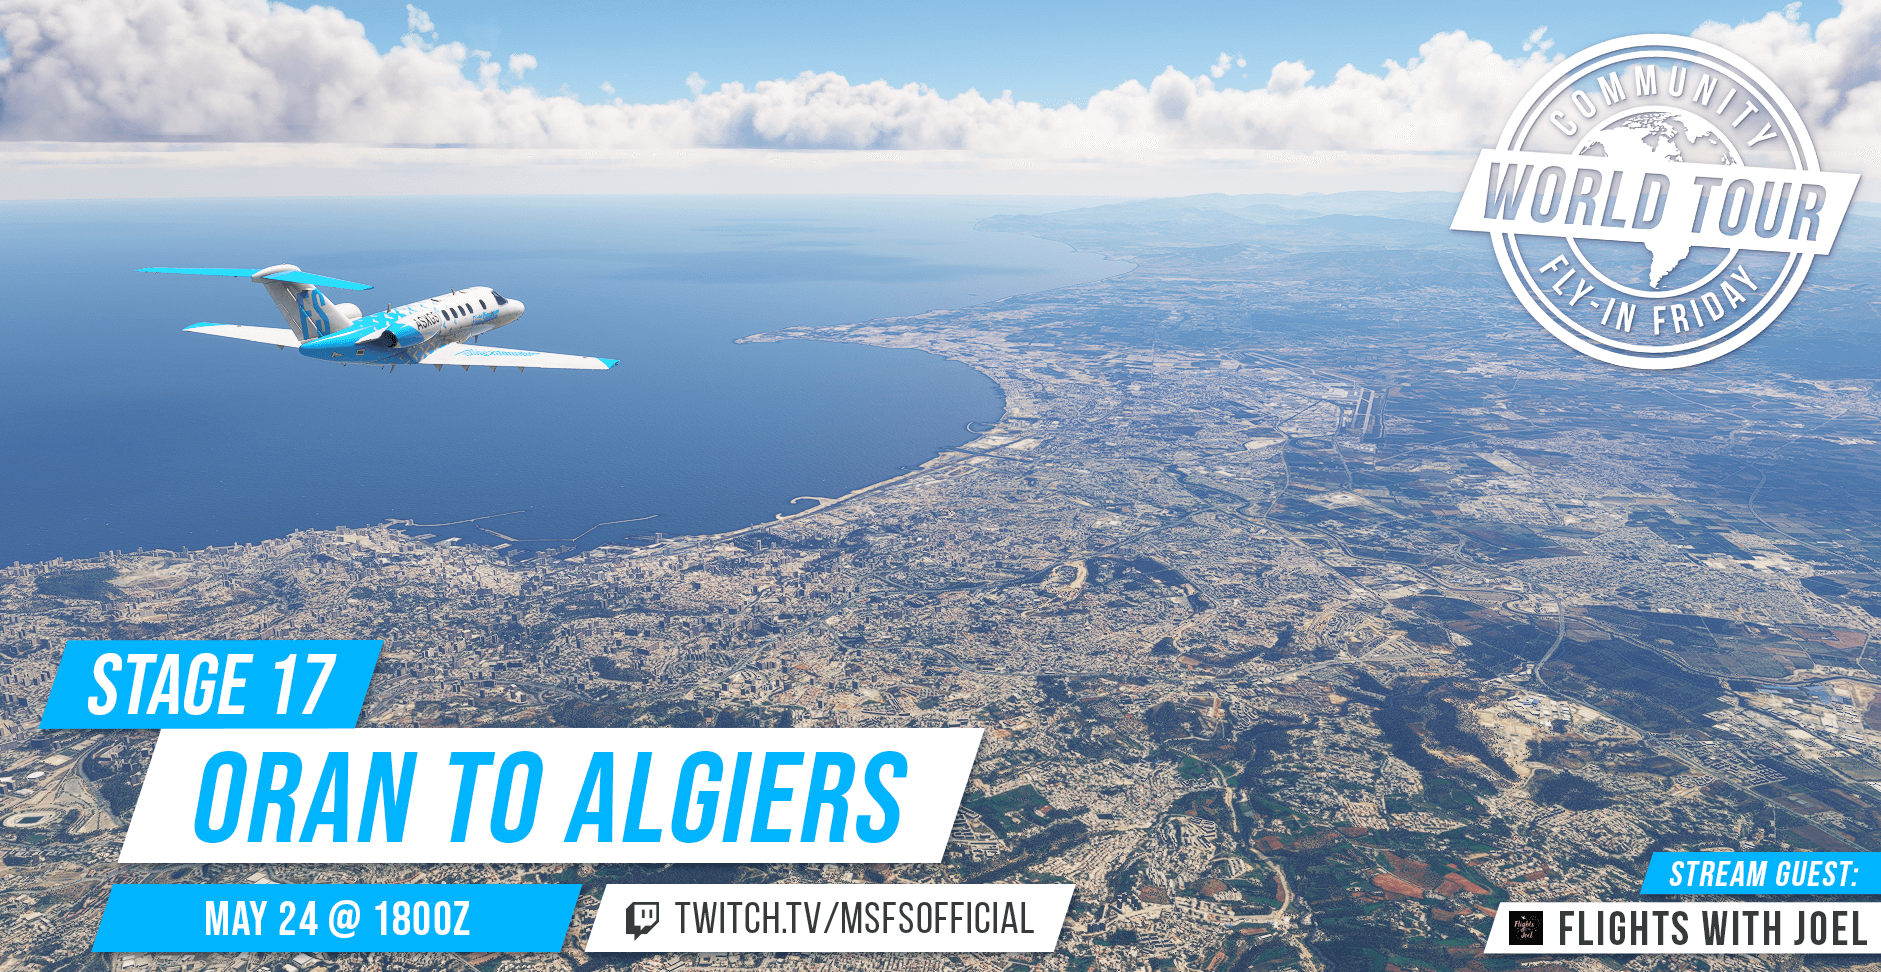 Community Fly-In Friday: World Tour Oran to Algiers. May 24th at 1800 UTC. twitch.tv/msfsofficial